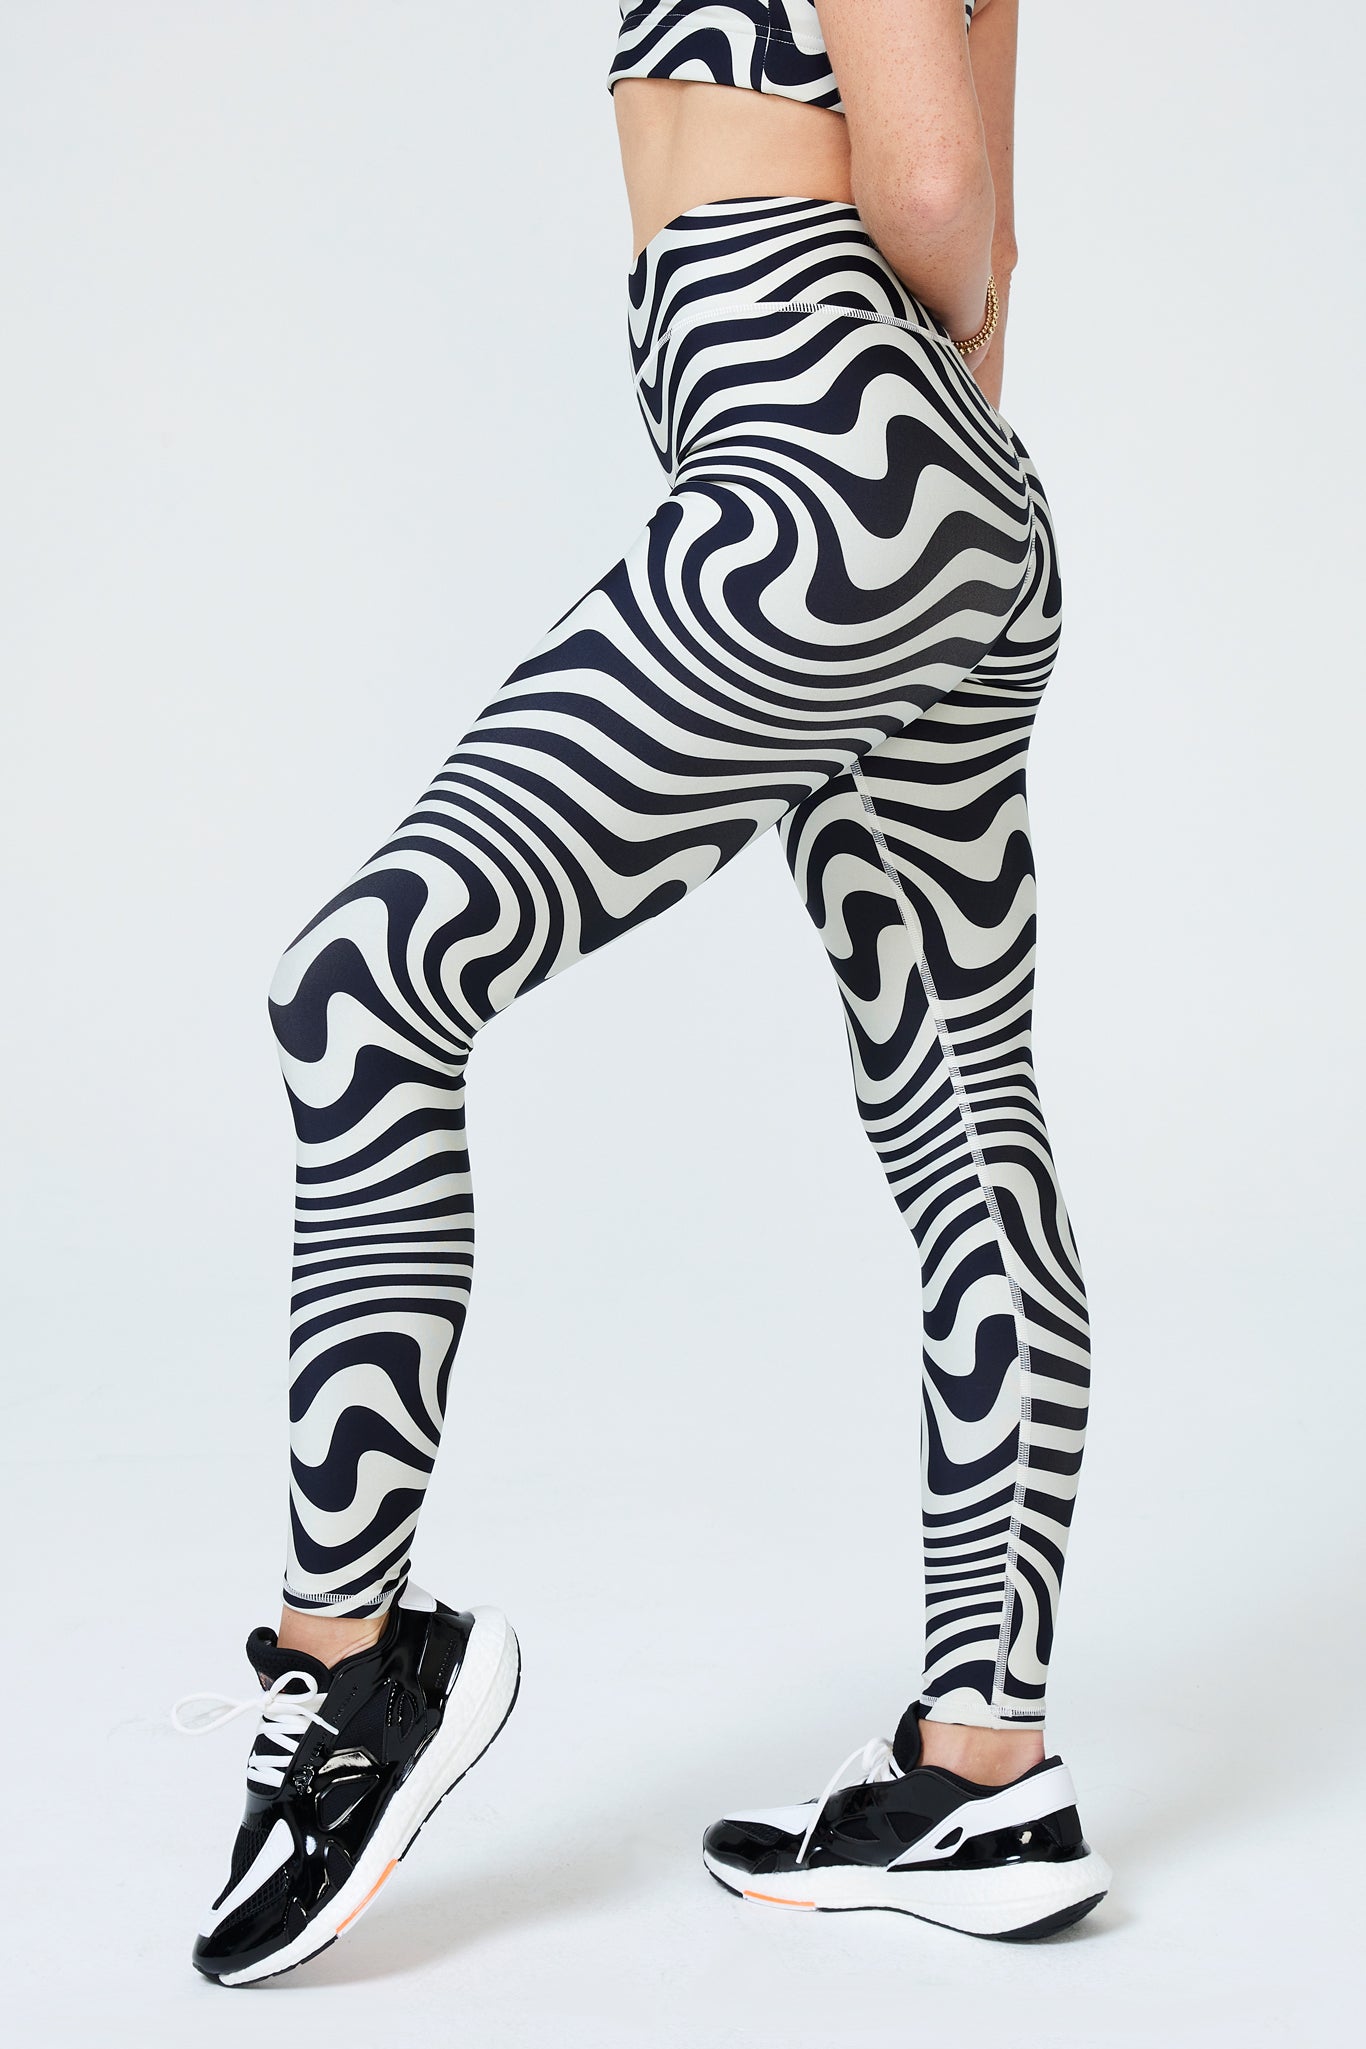 DuoKnit Leggings in Black and White Wave –